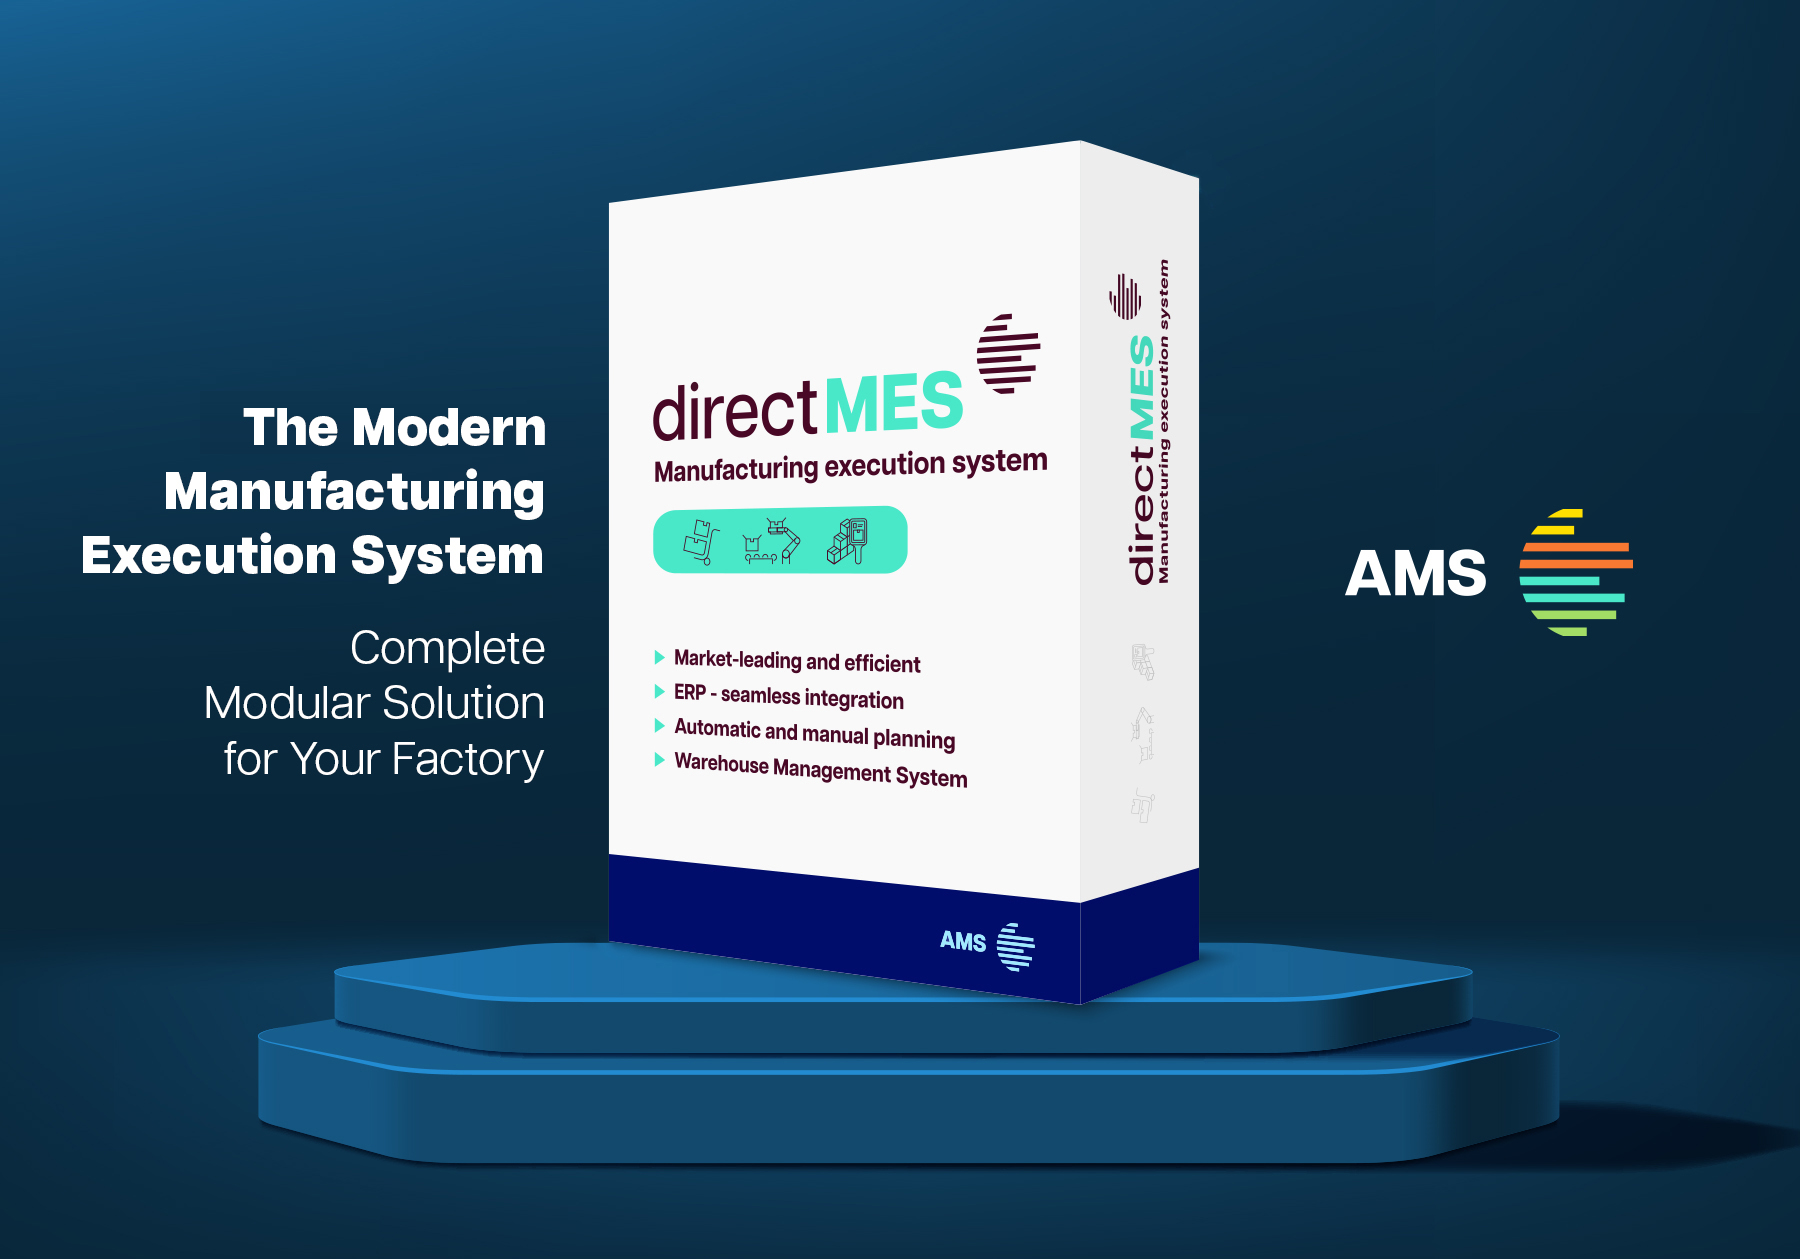 The Modern Manufacturing Execution System - Complete Modular Solution for your Factory.